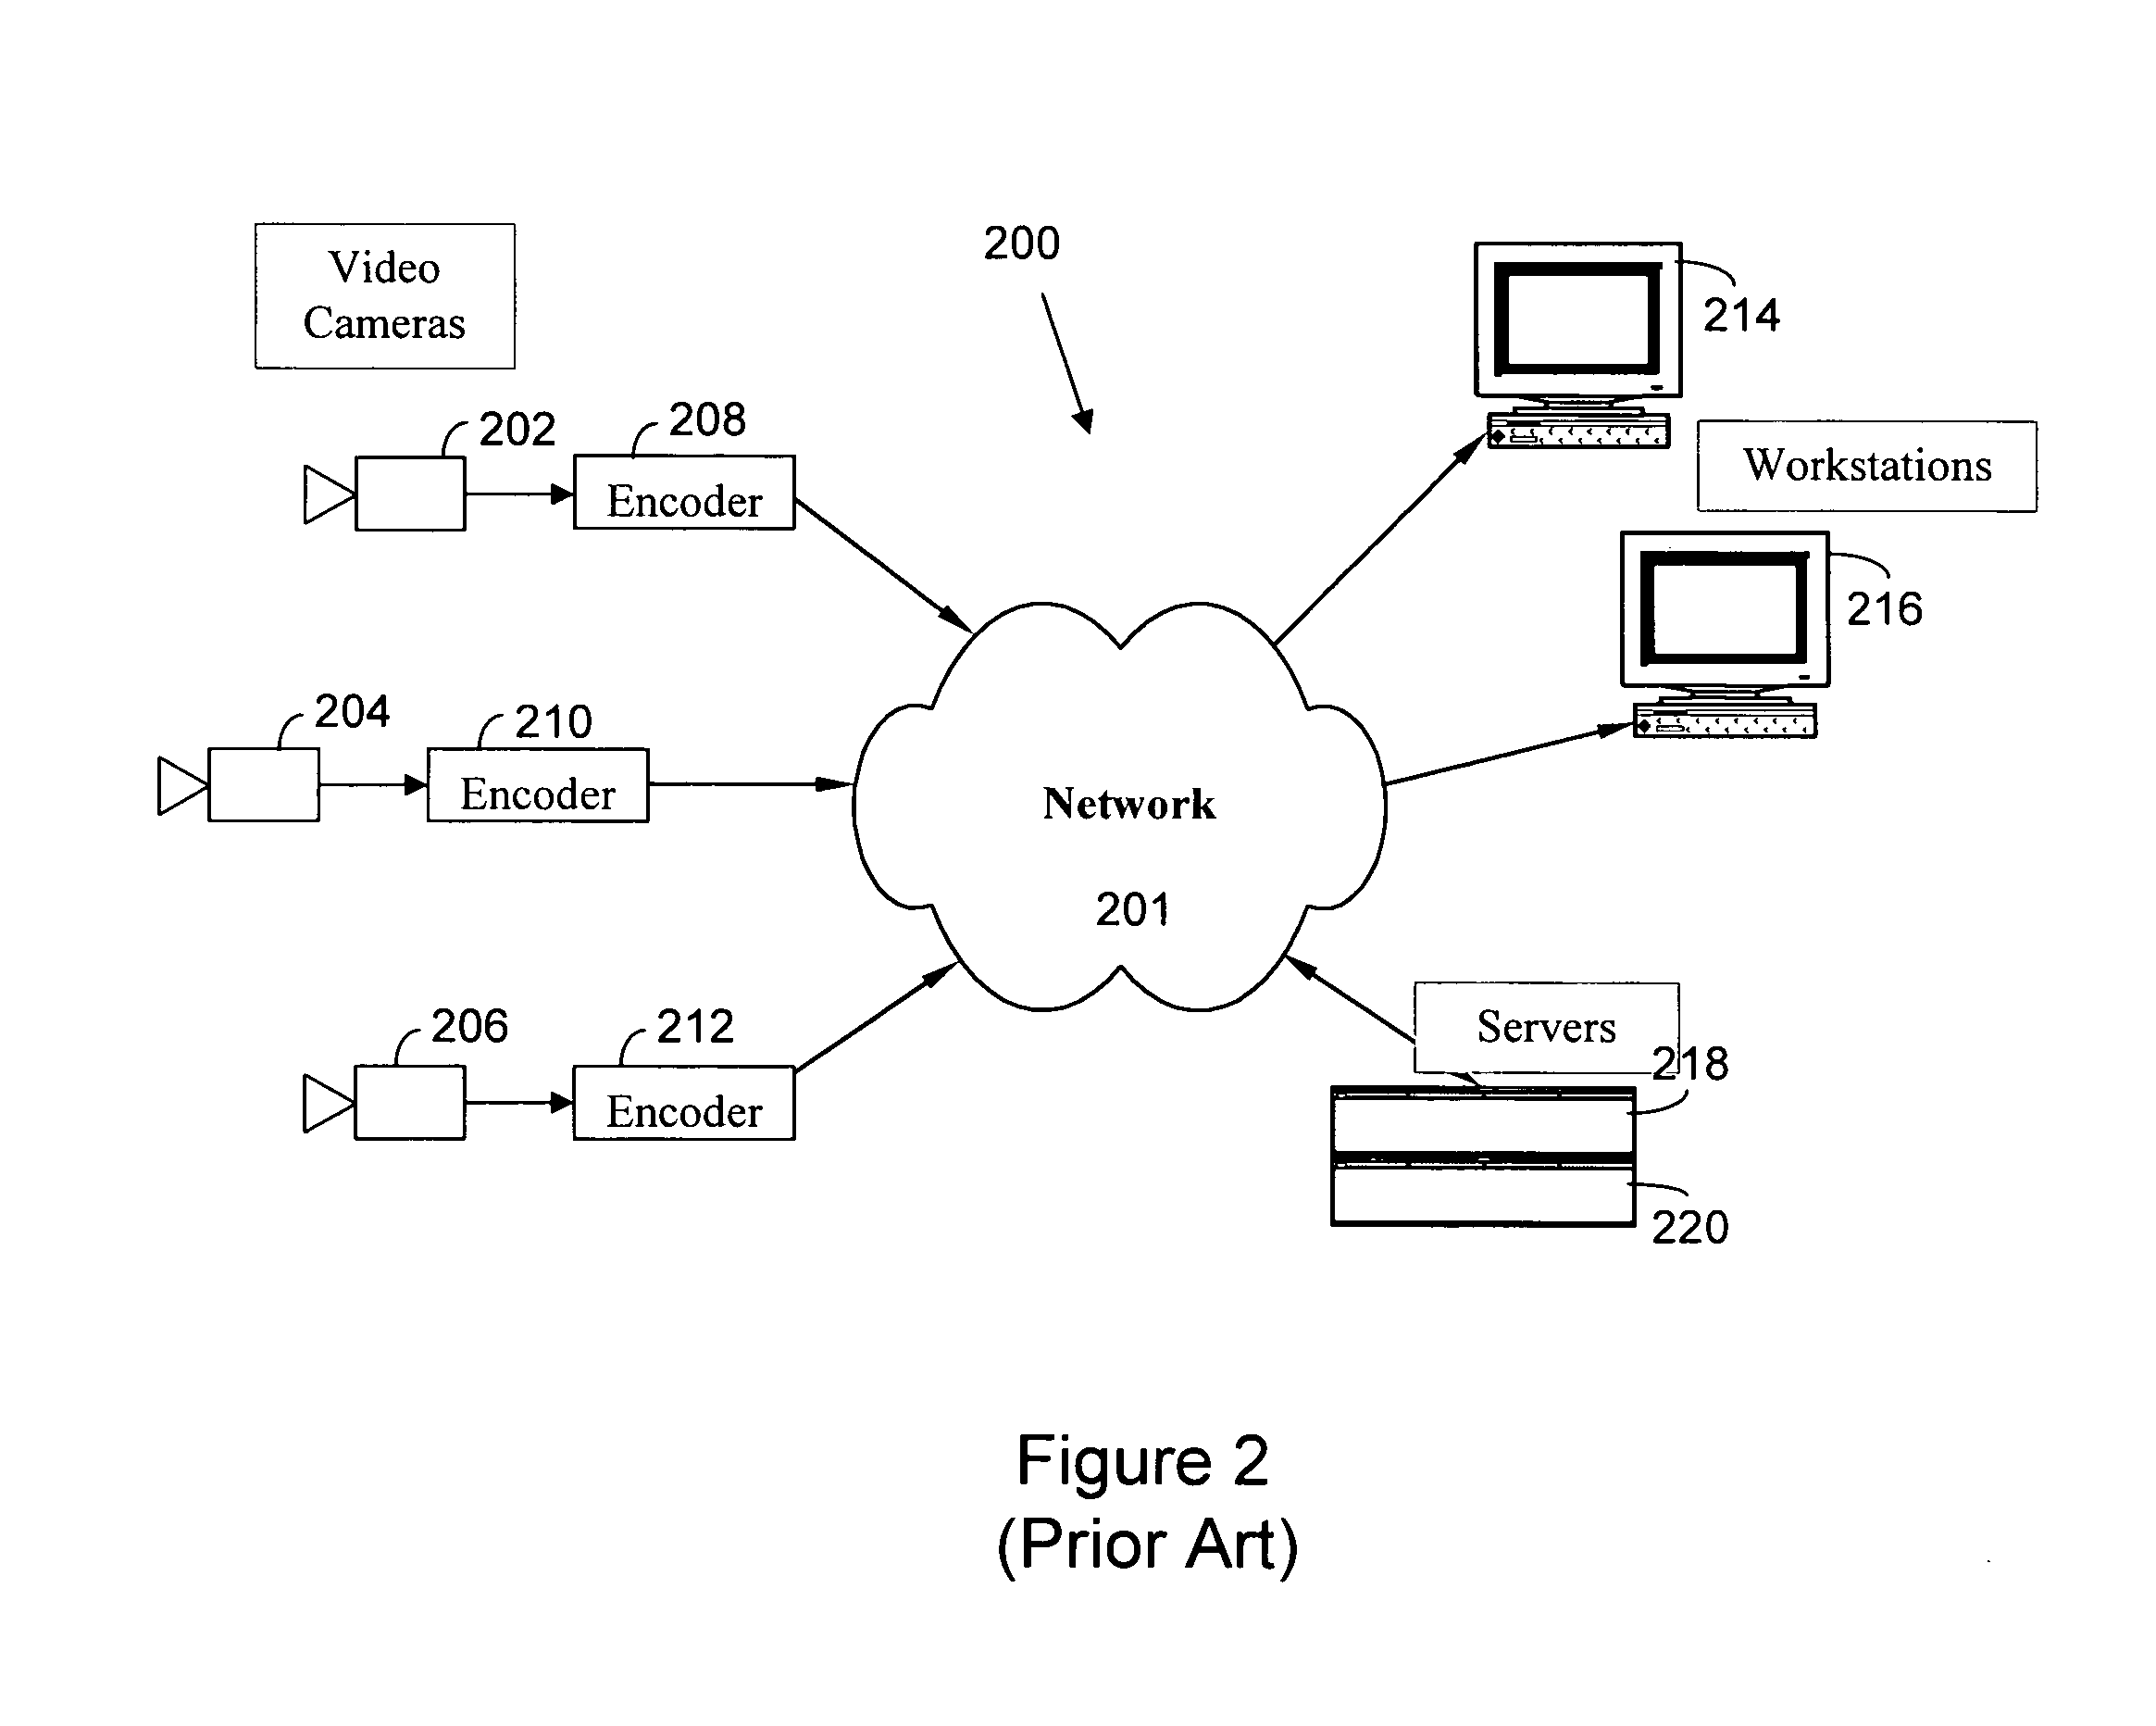 Apparatus and method for flexible delivery of multiple digital video streams